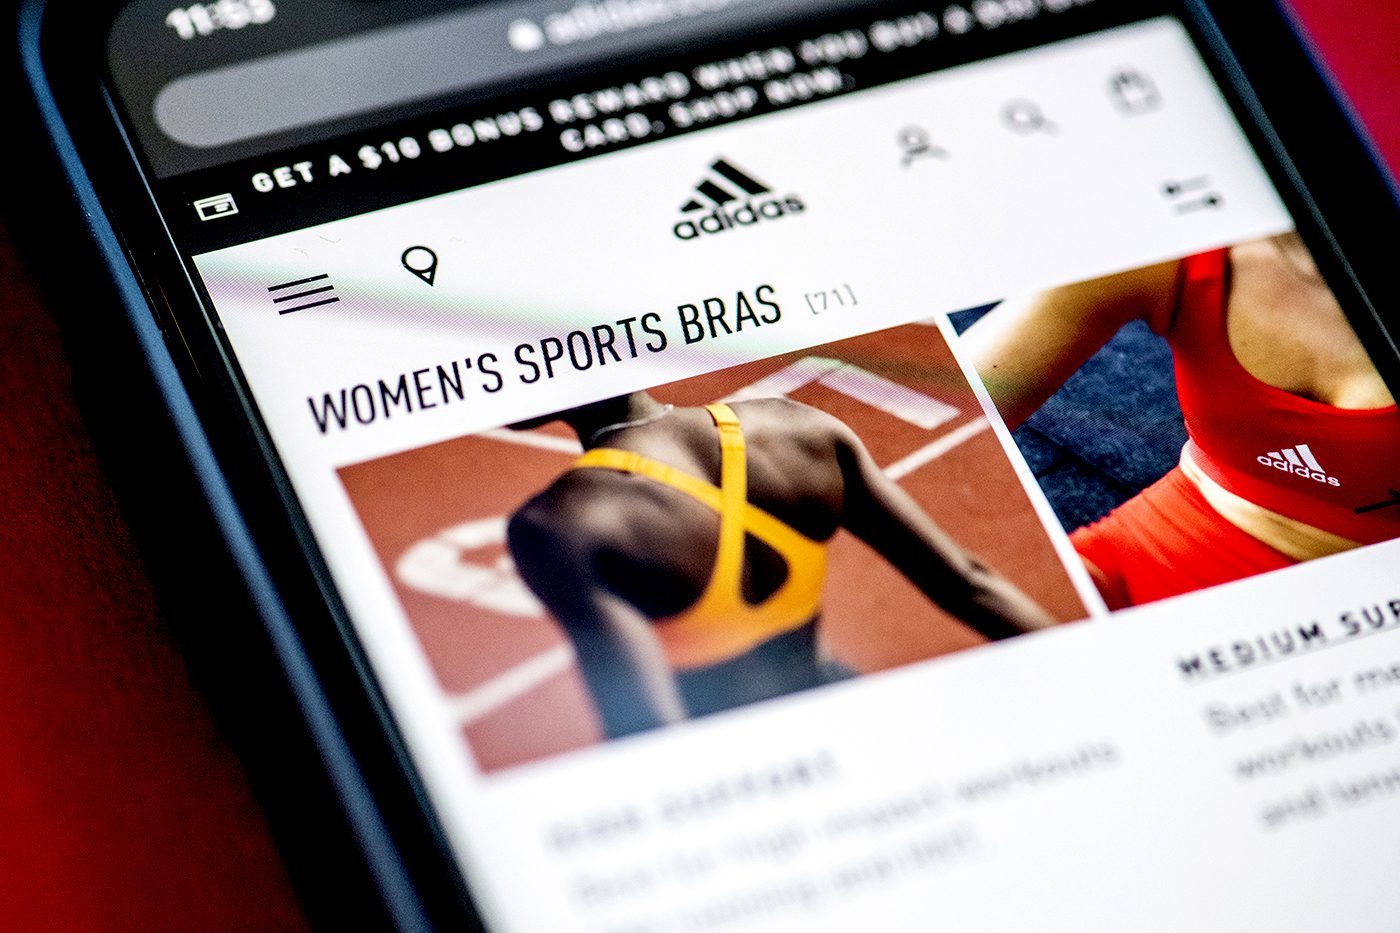 Rachel Rodgers weighs in on new Adidas ad campaign - Women's